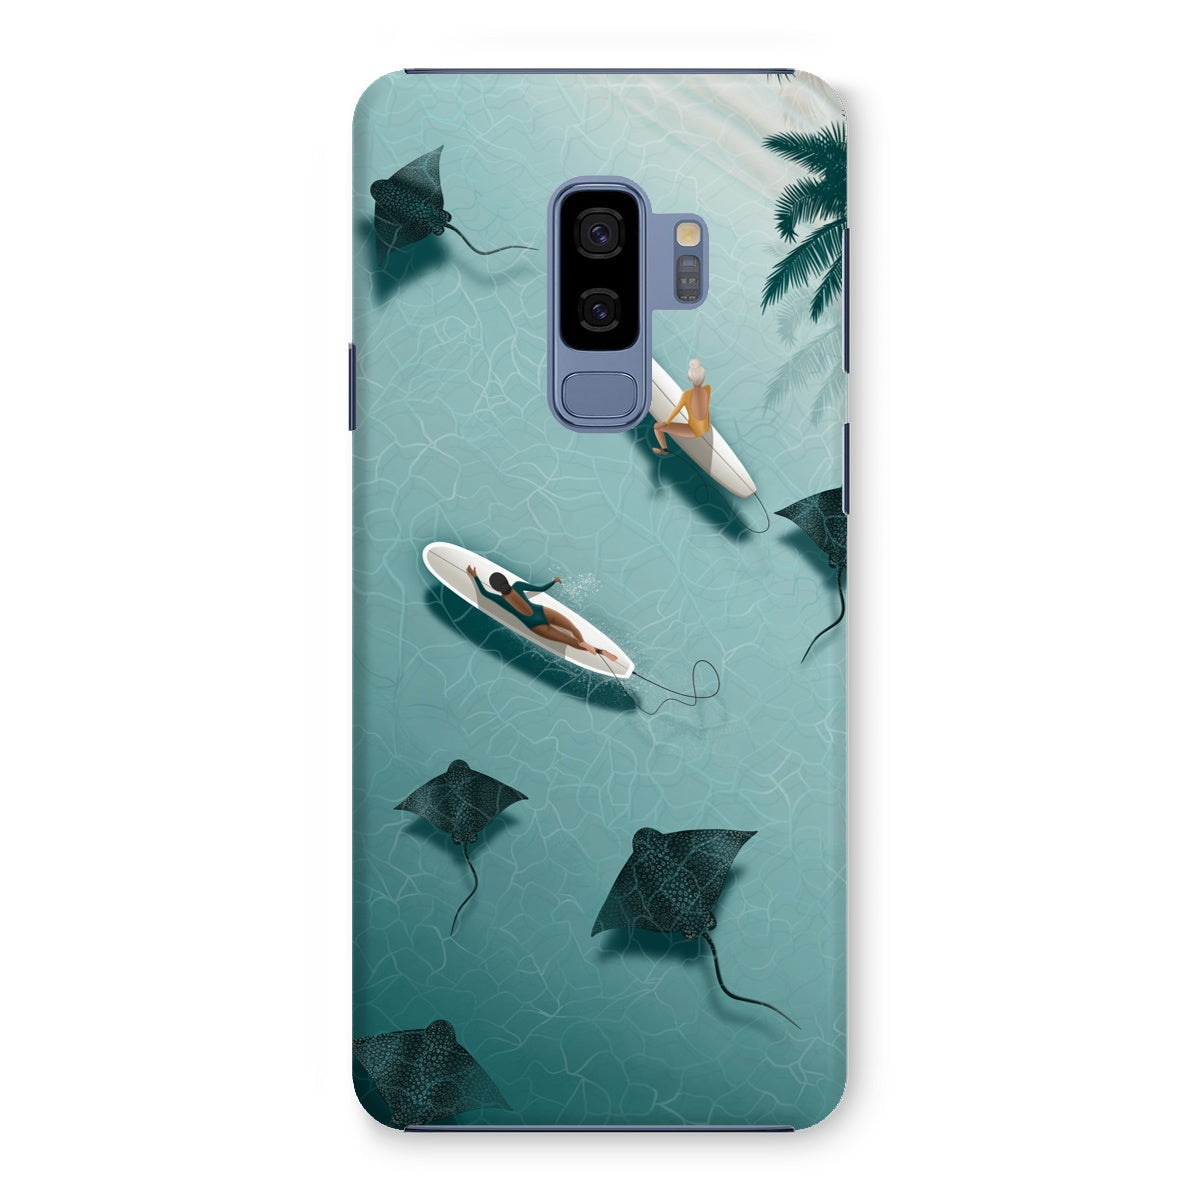 Slim Dancing with Rays Phone Case